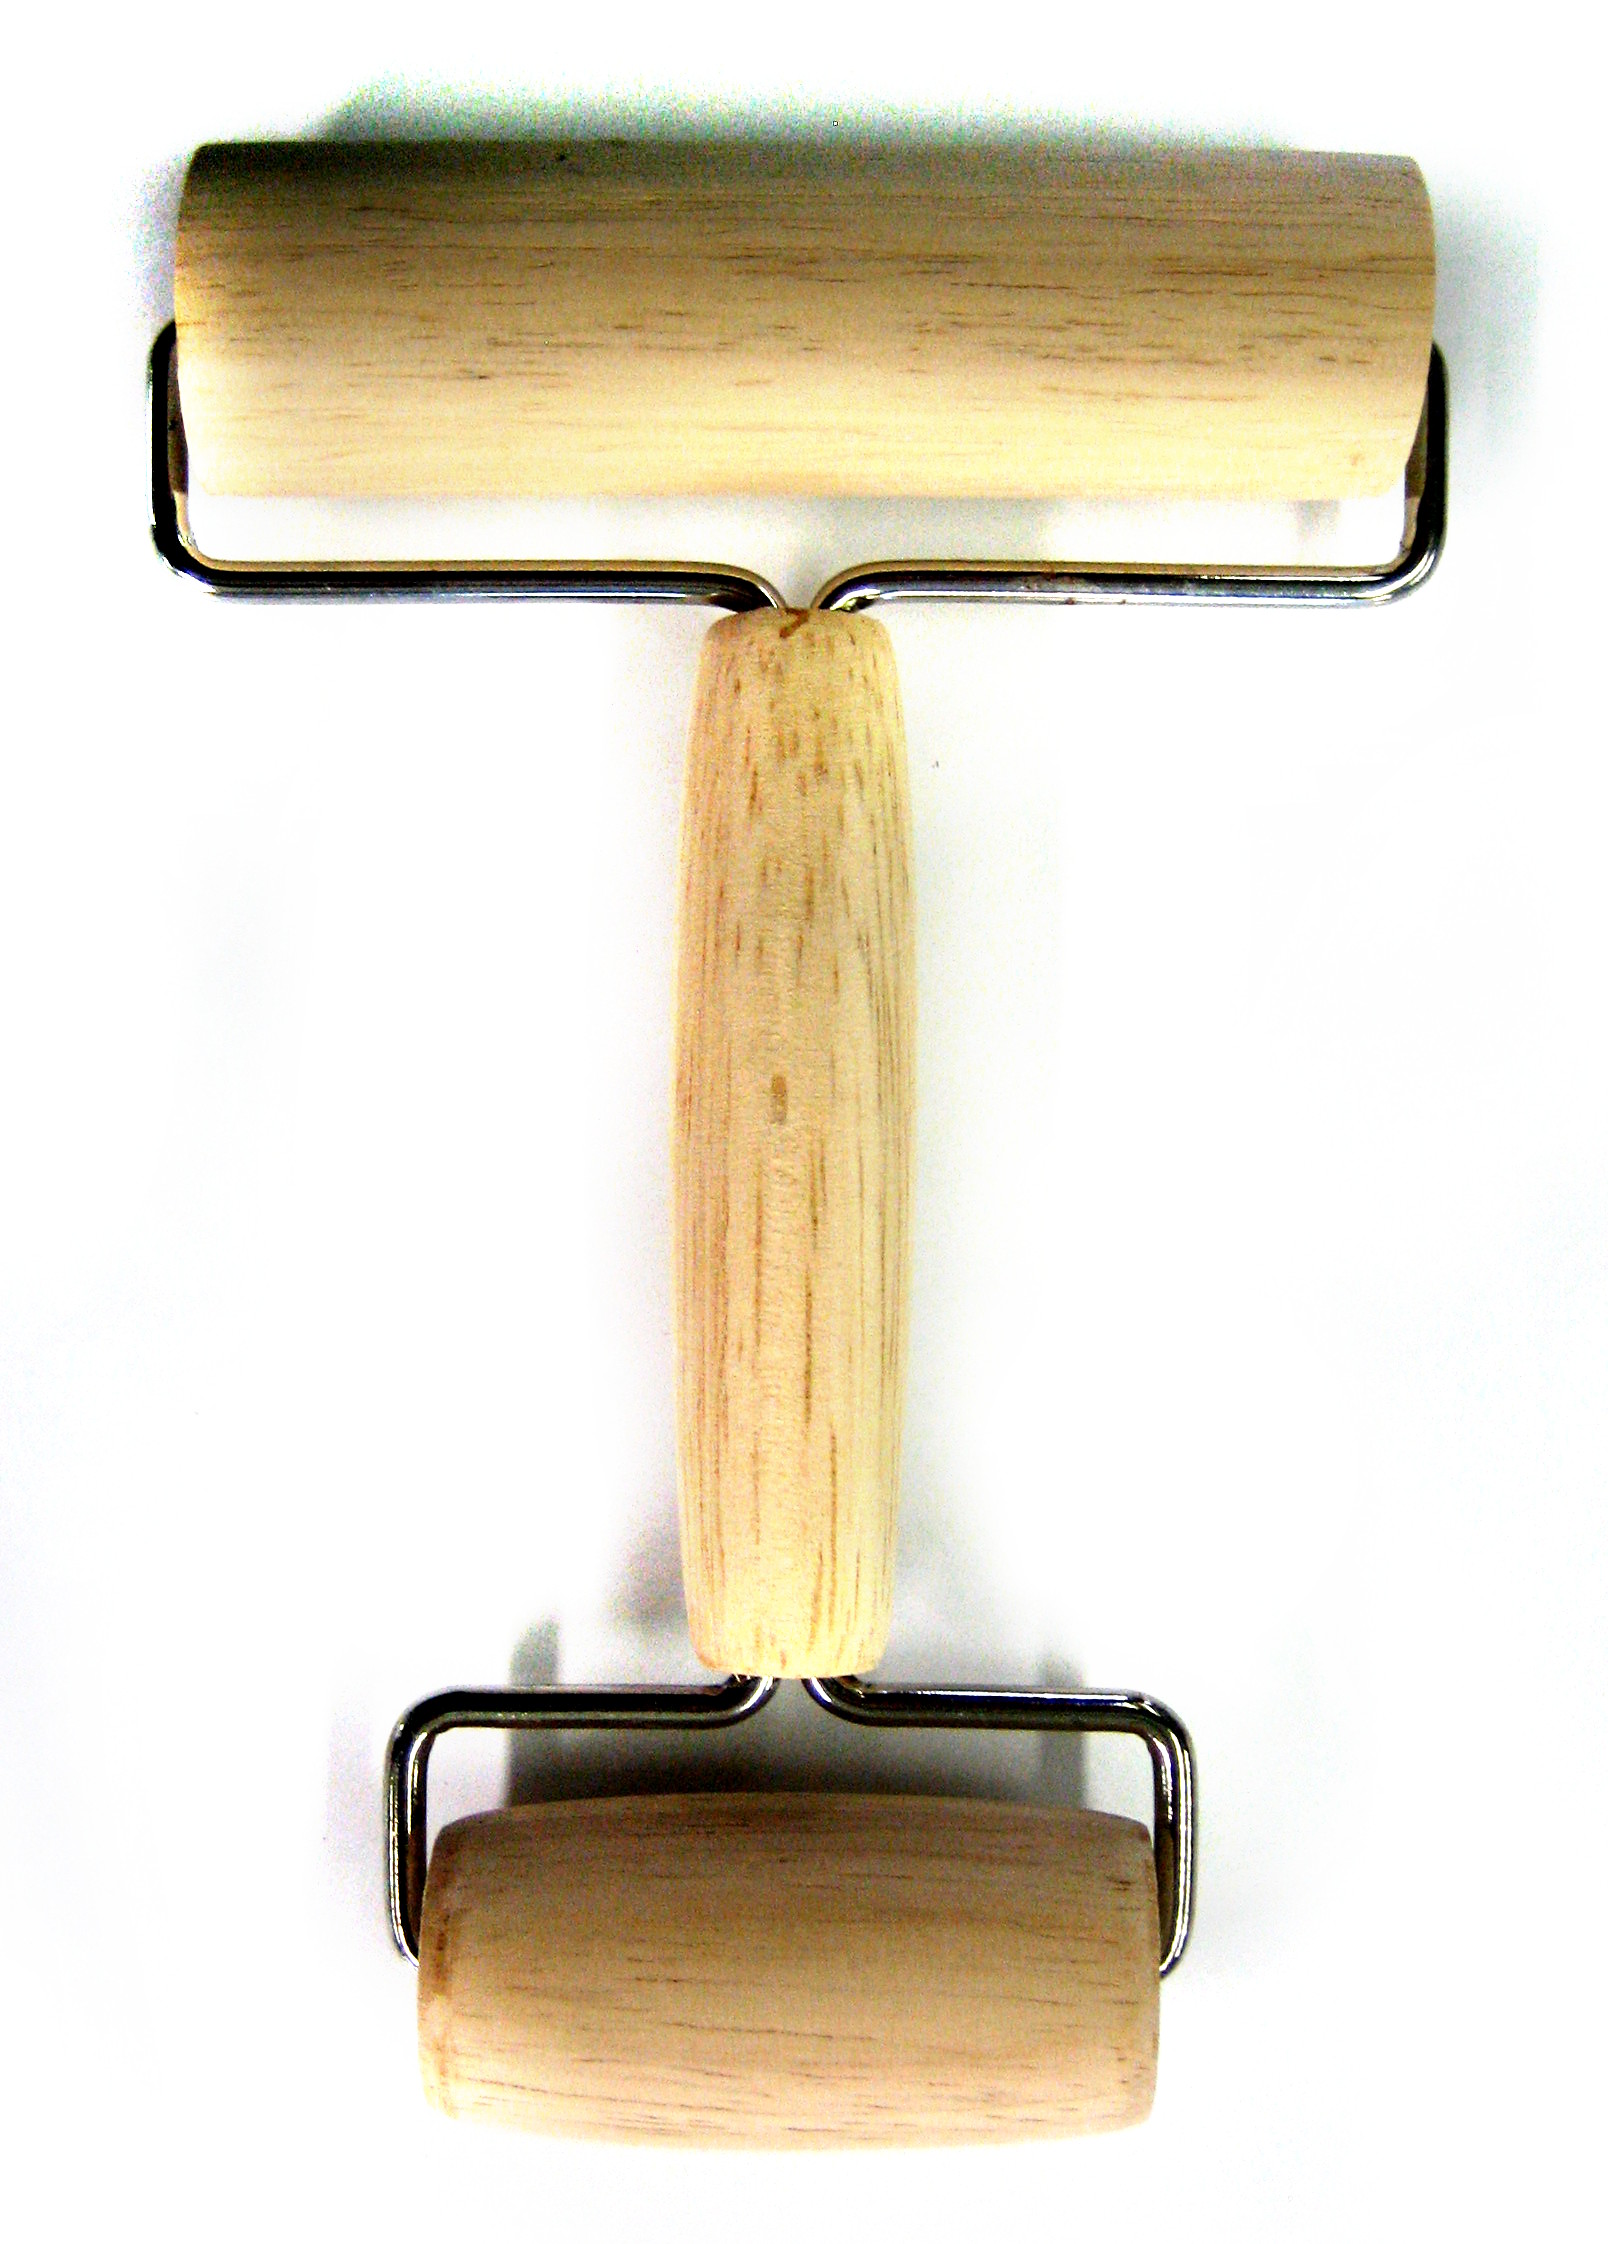 Double-Ended Hand Roller